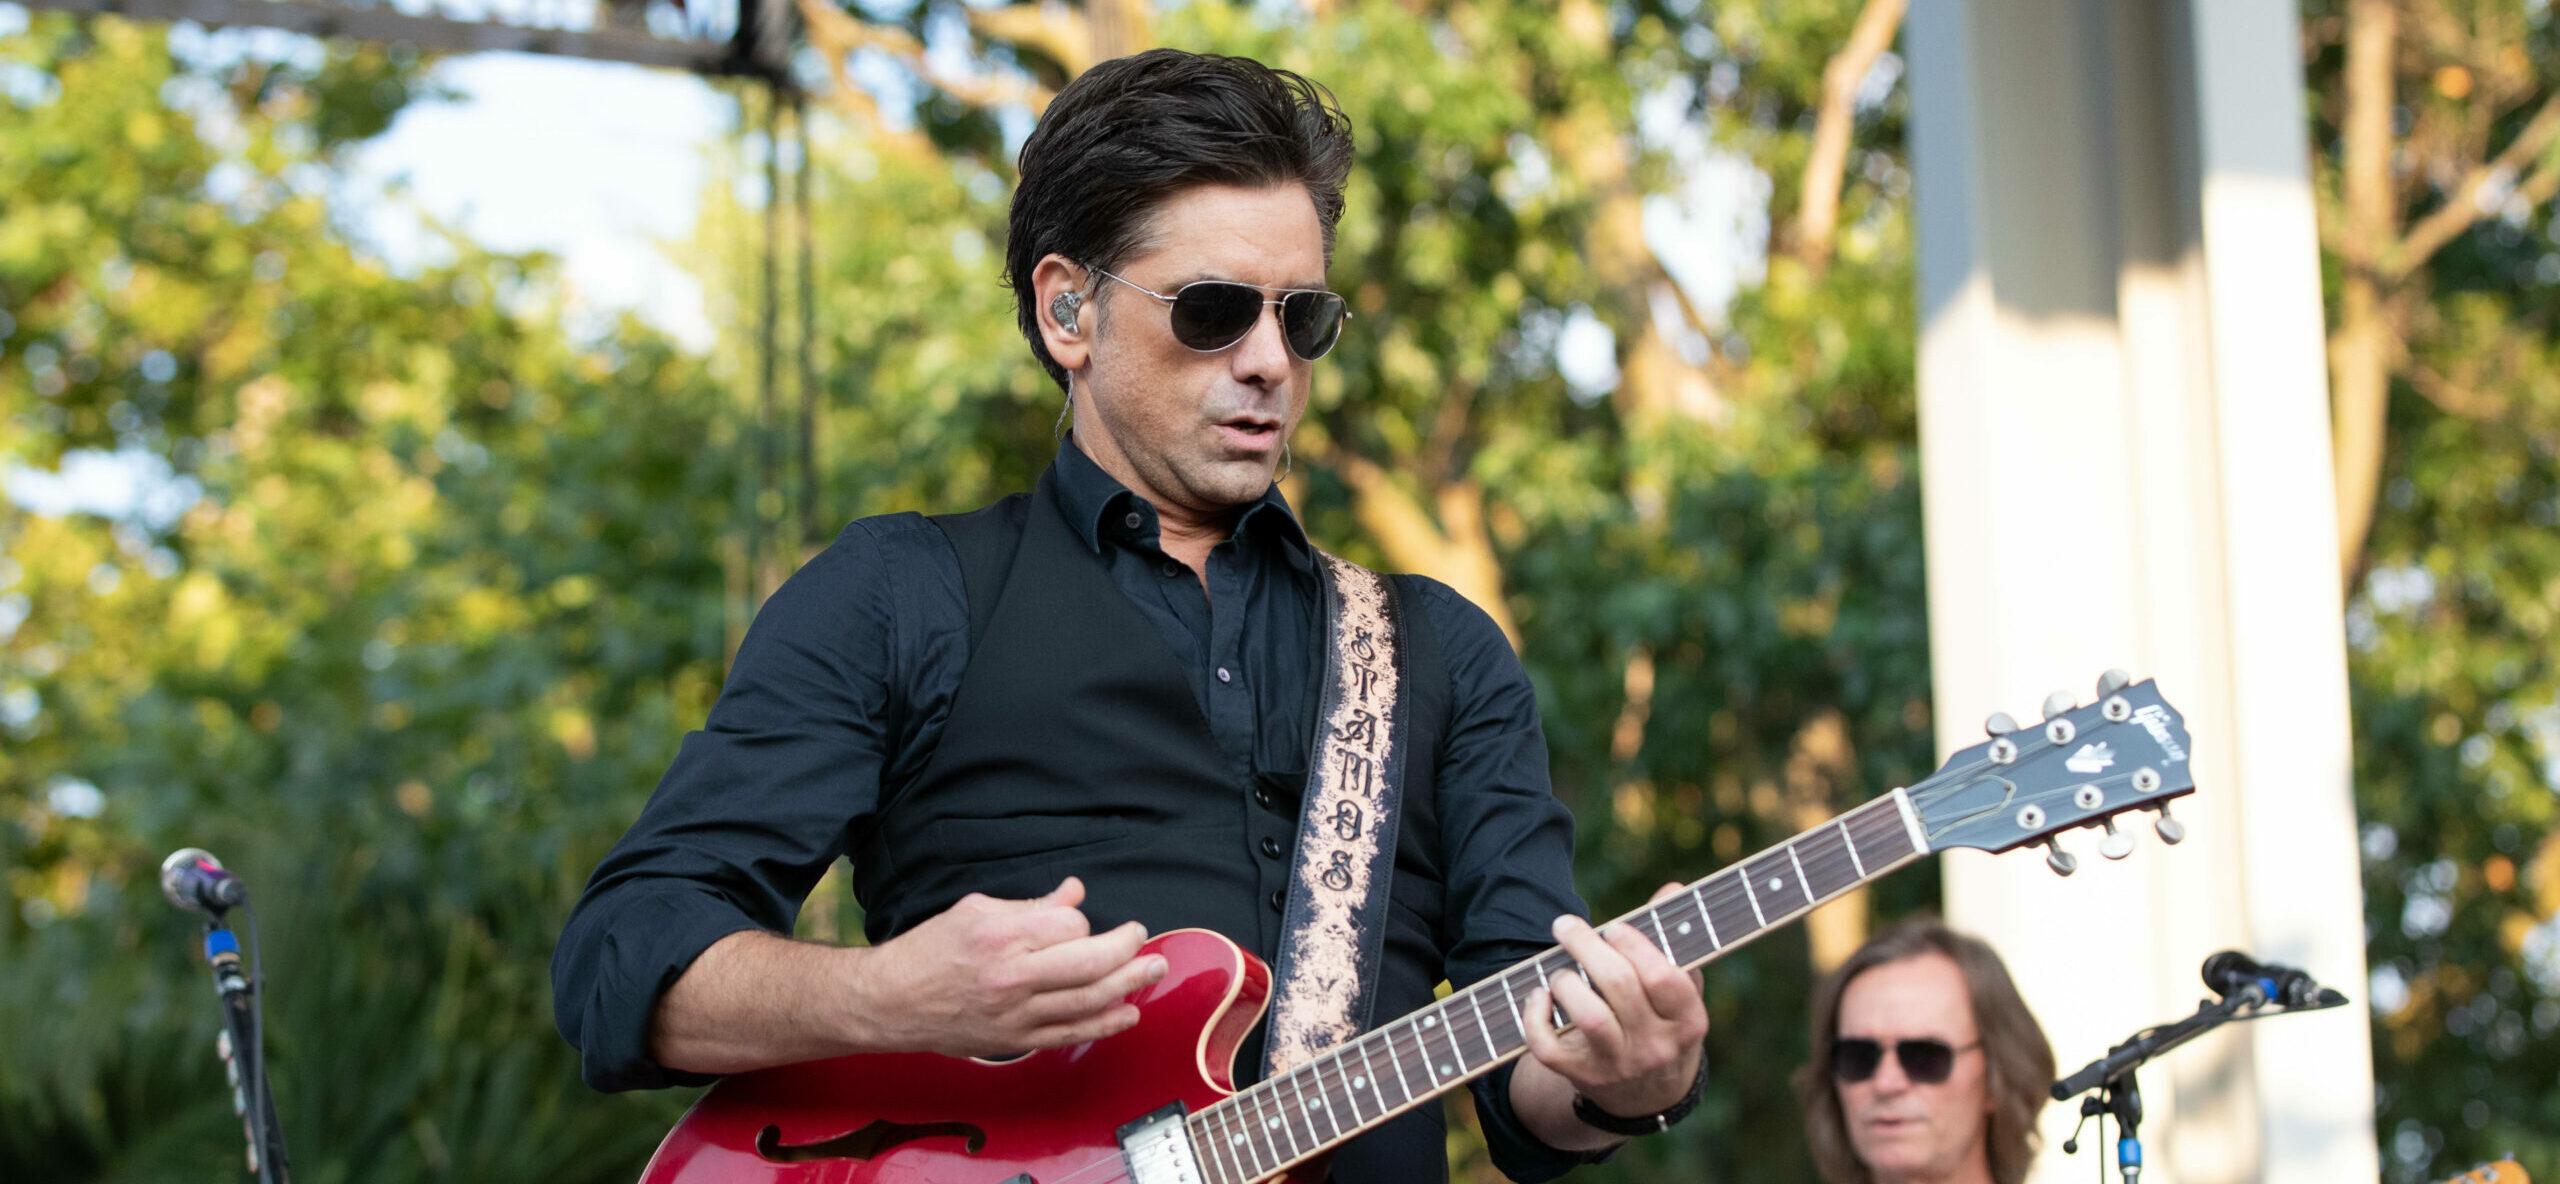 JOHN STAMOS performs with THE BEACH BOYS at the Indiana State Fair free stage on August 20, 2021 in Indianapolis, Indiana.